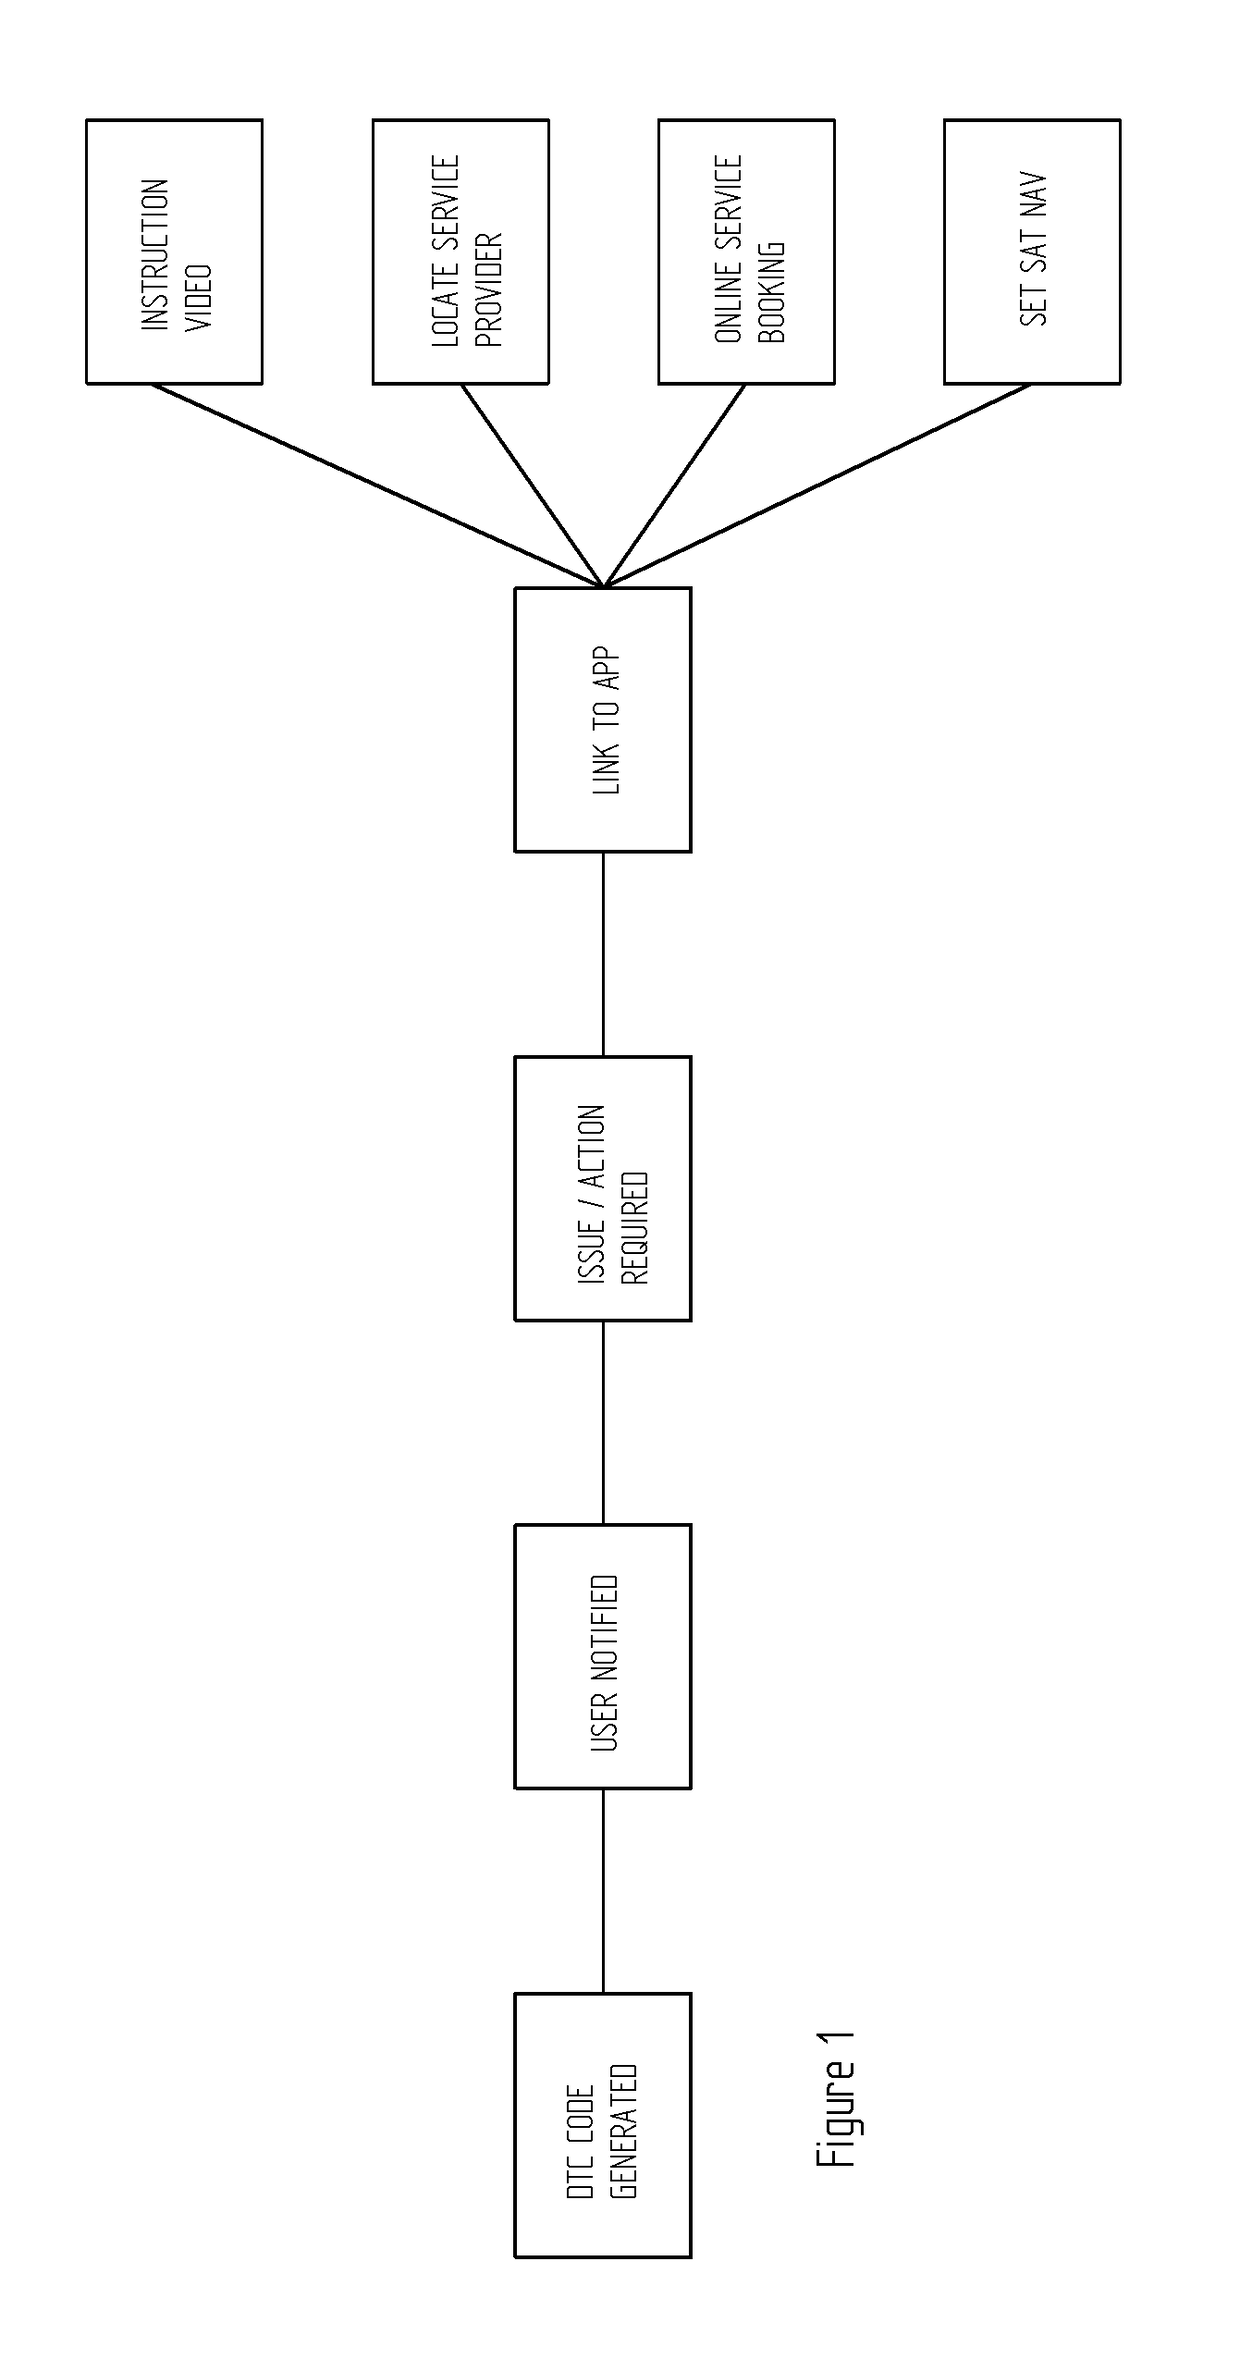 System for providing notification of a vehicle event